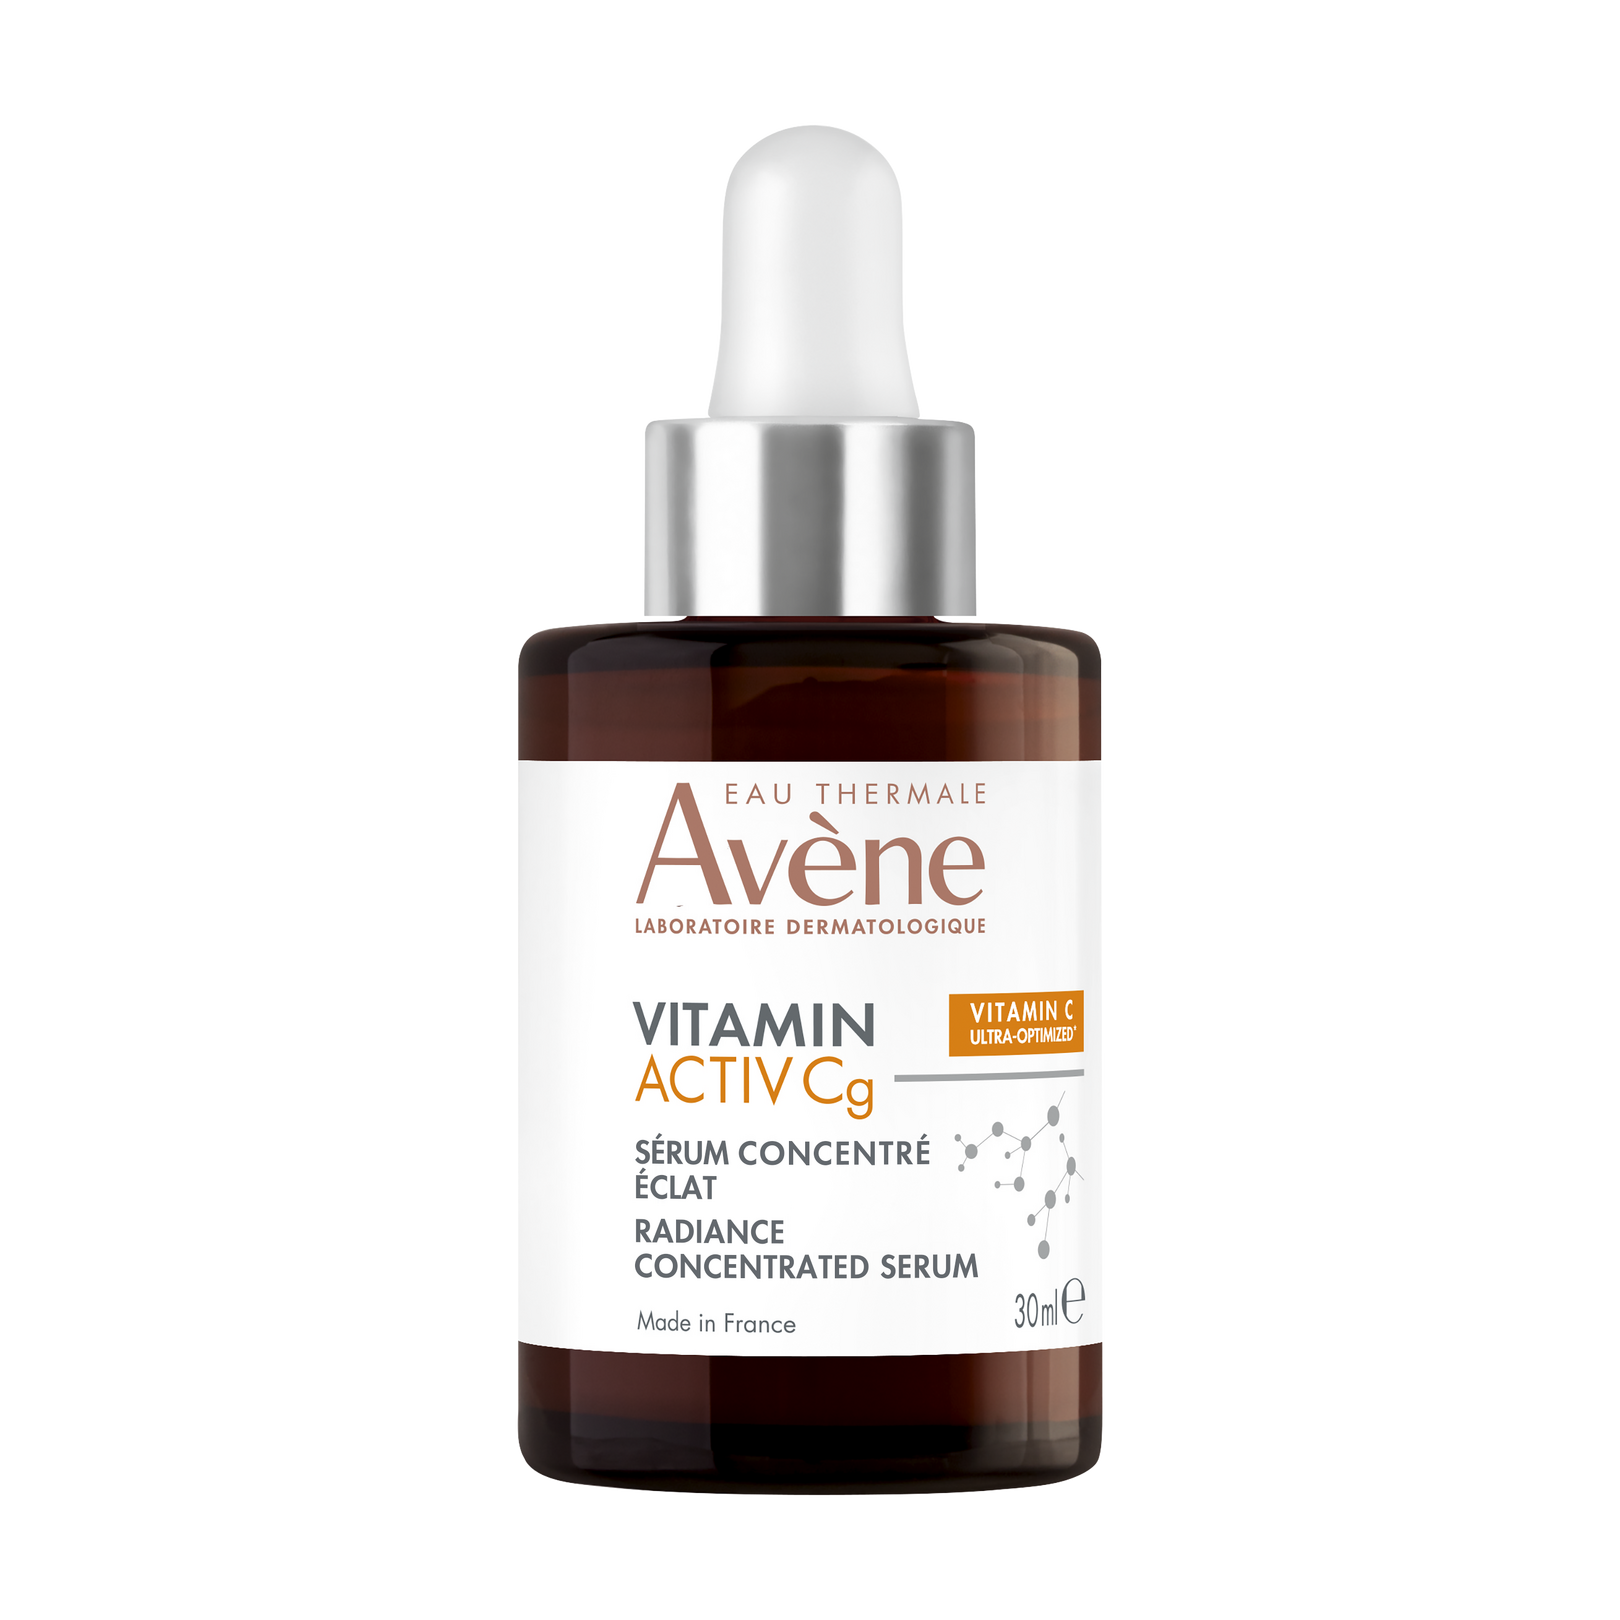 VITAMIN ACTIV Cg Radiance Concentrated Serum 